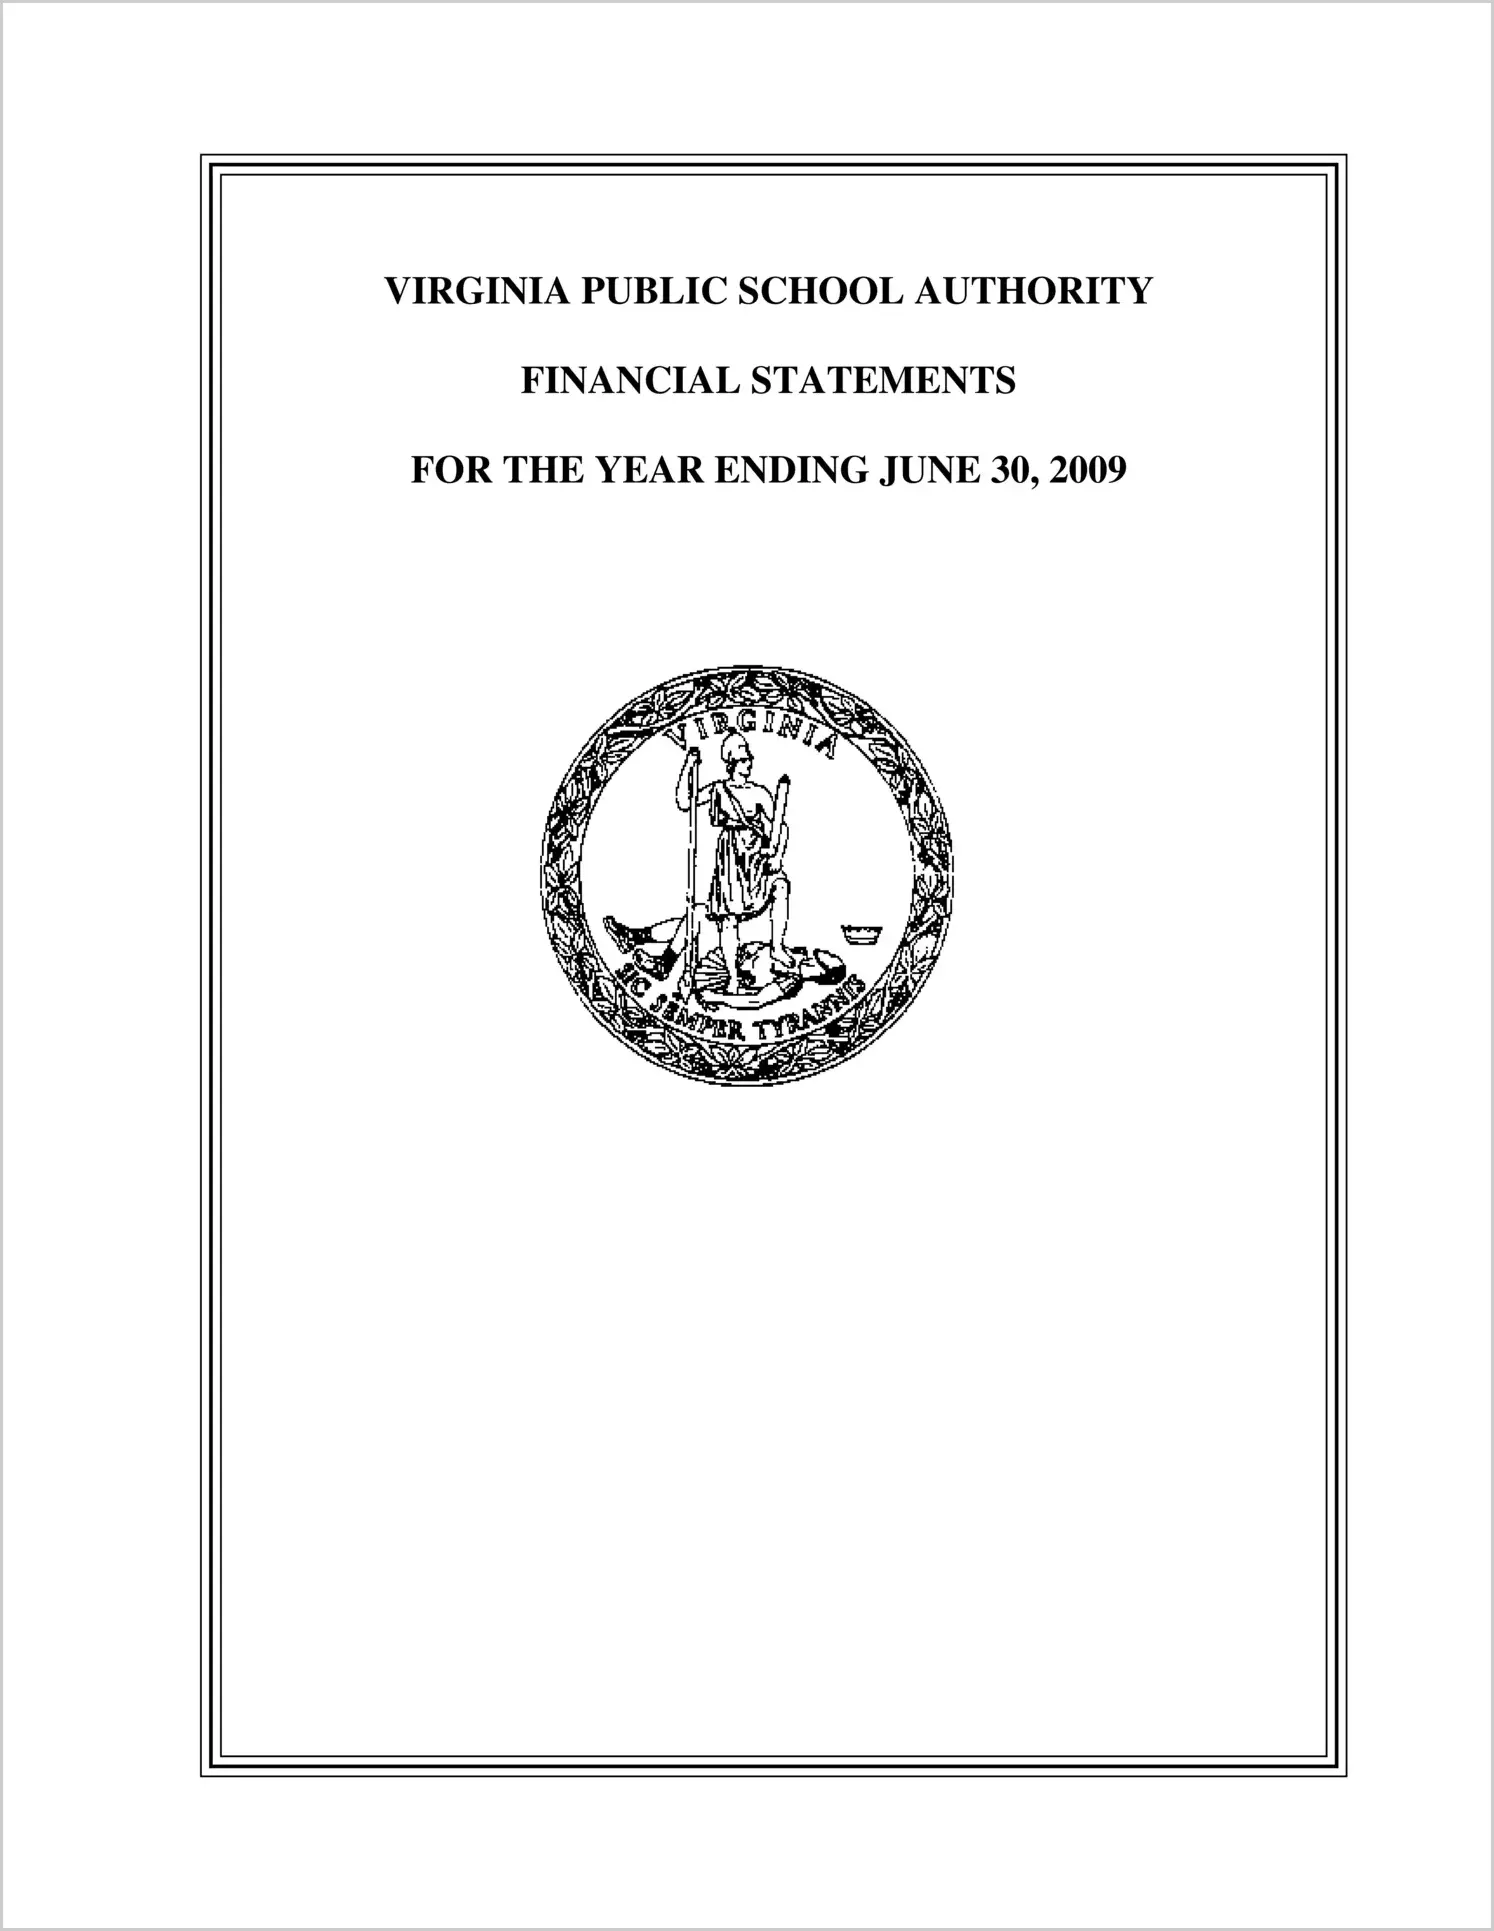 Virginia Public School Authority for the year ended June 30, 2009